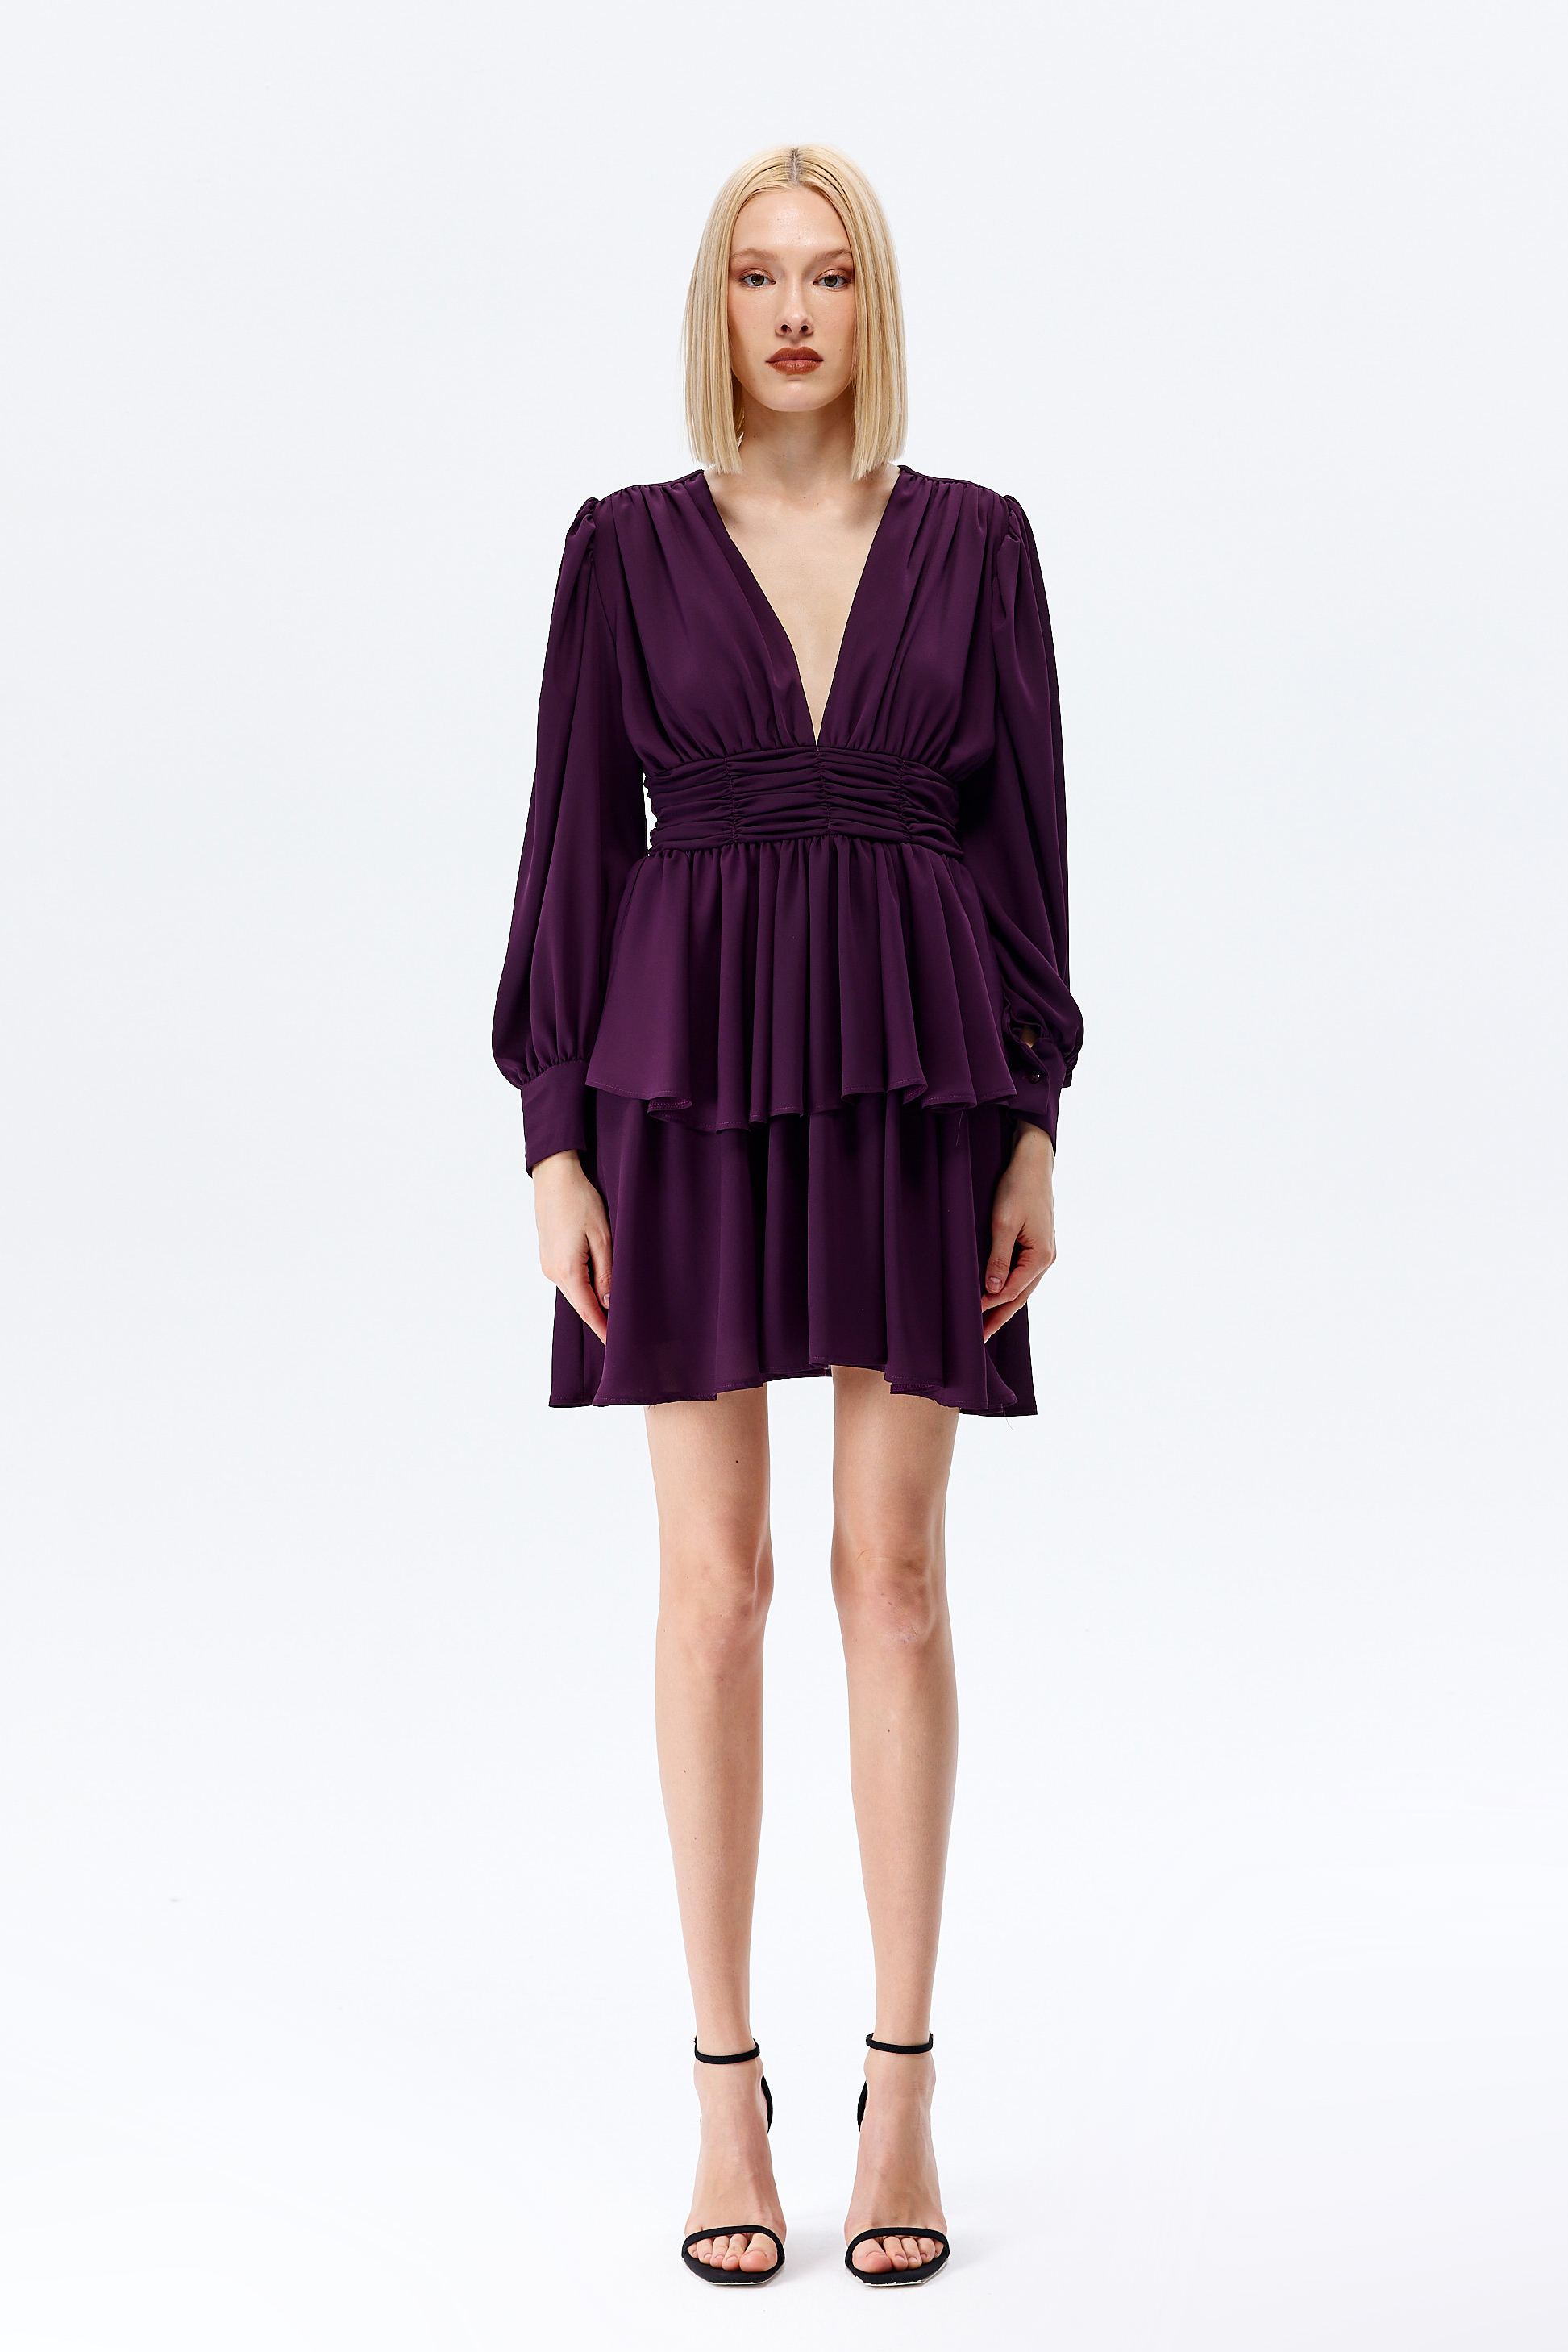 A model wears CRO10105 - Dress - Purple, wholesale Dress of Cream Rouge to display at Lonca